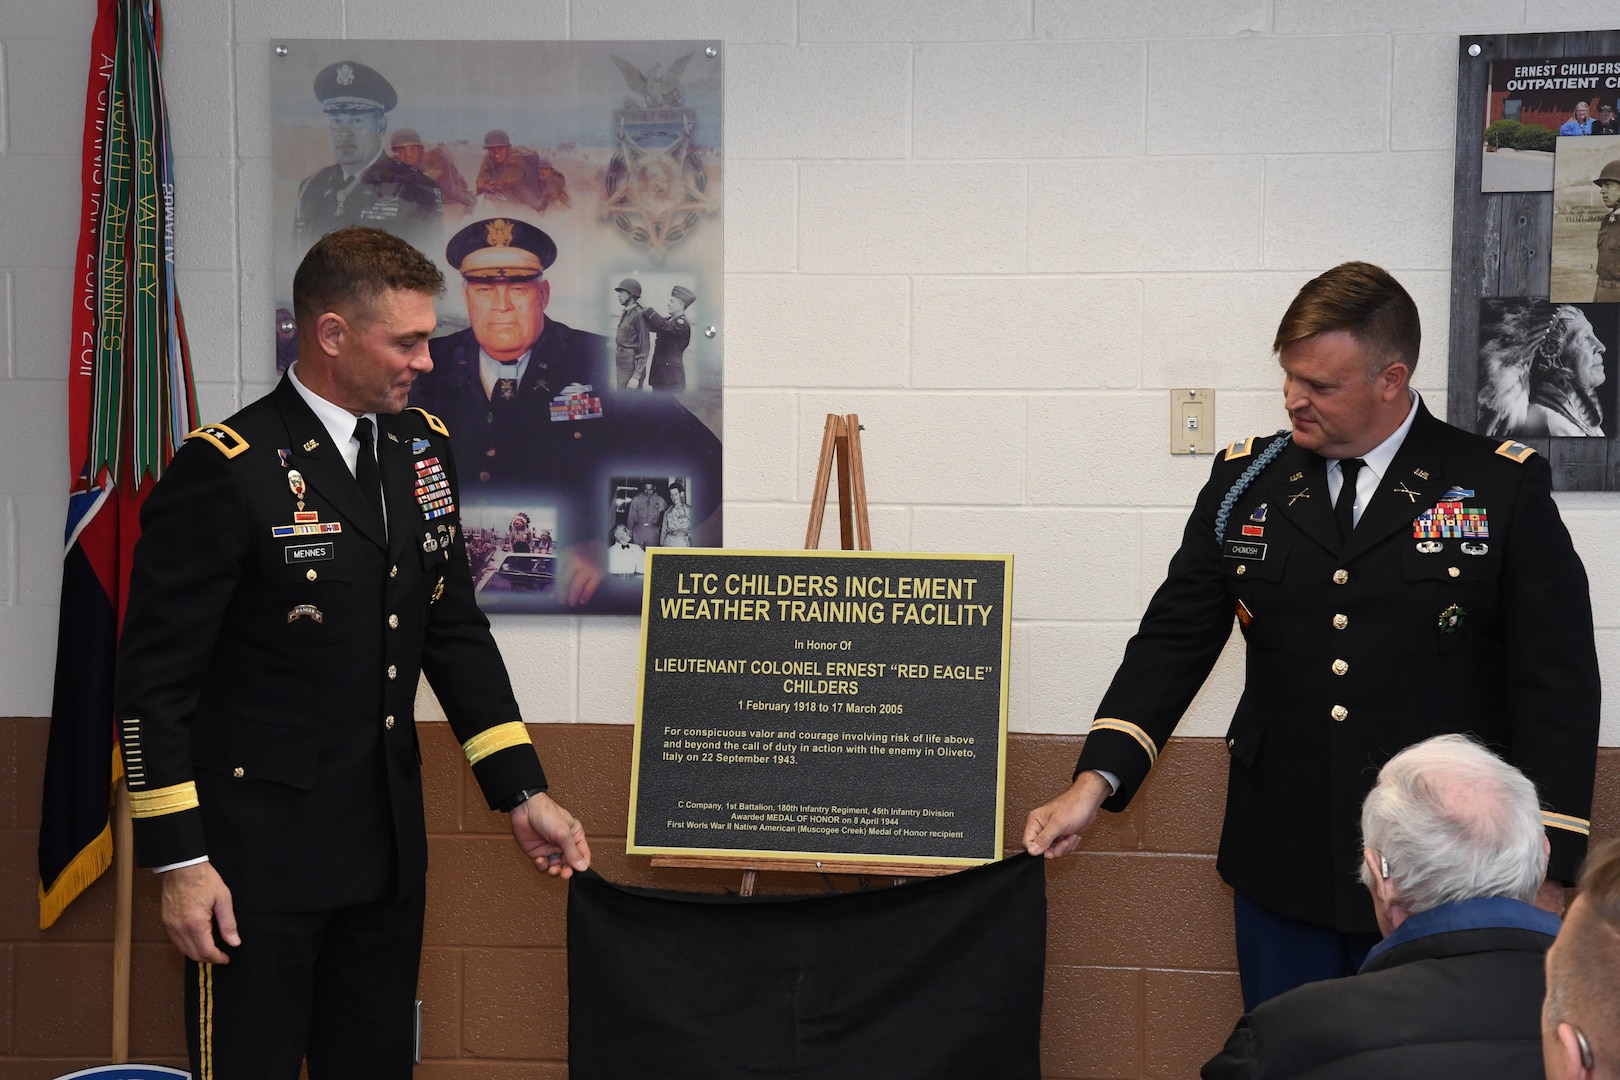 Maj. Gen. Brian J. Mennes, 10th Mountain Division (LI) and Fort Drum commander, and Col. Christopher Chomosh, representing the Oklahoma Army National Guard and 45th Infantry Division, unveil a plaque honoring retired Lt. Col. Ernest Childers Nov. 20, 2019, at Fort Drum. The LTC Childers Inclement Weather Training Facility honors the first American Indian Medal of Honor recipient of the 20th century.